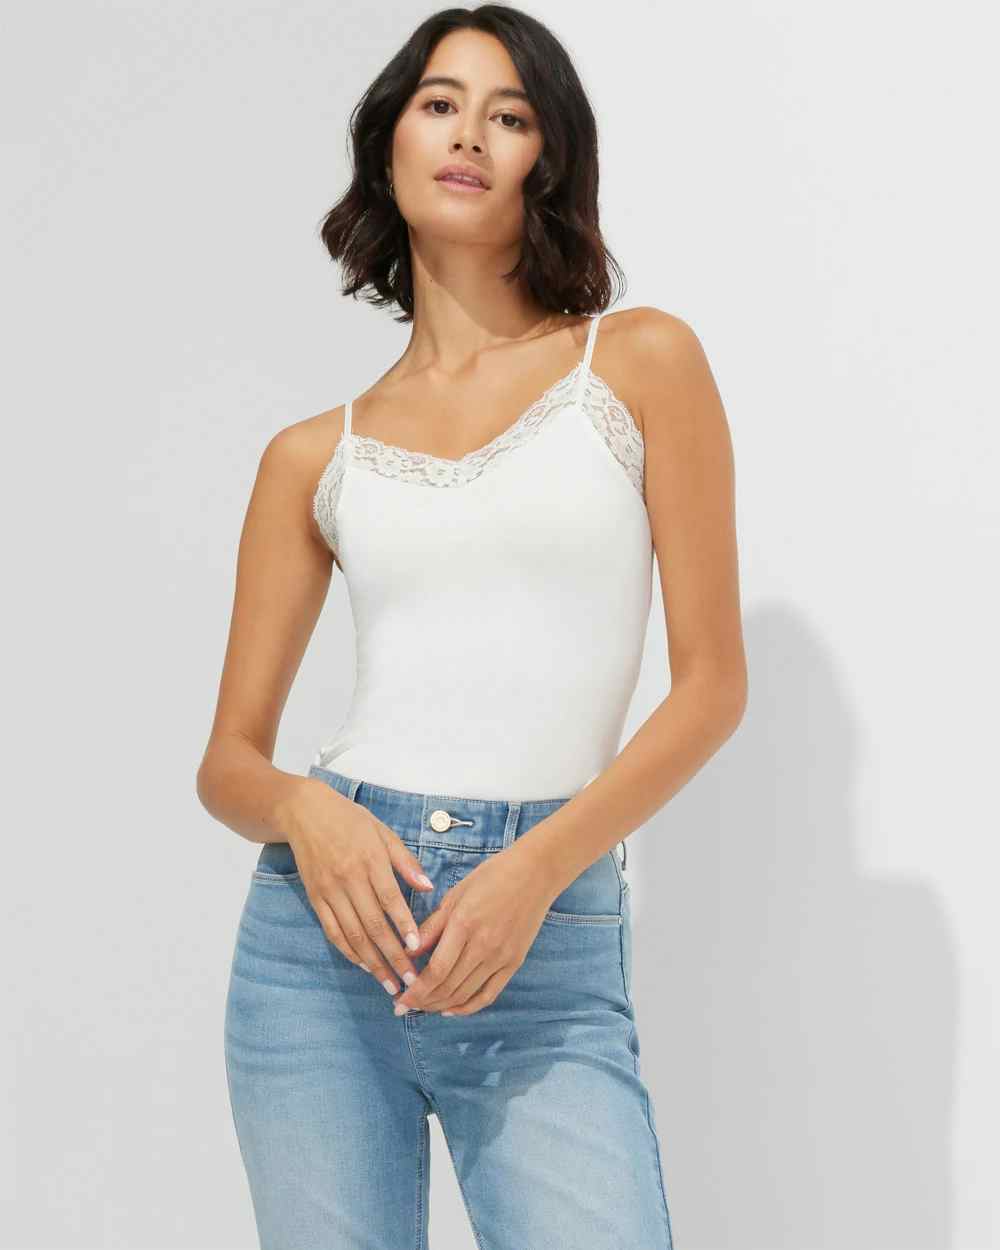 Outlet WHBM Wide-Lace Trim Cami